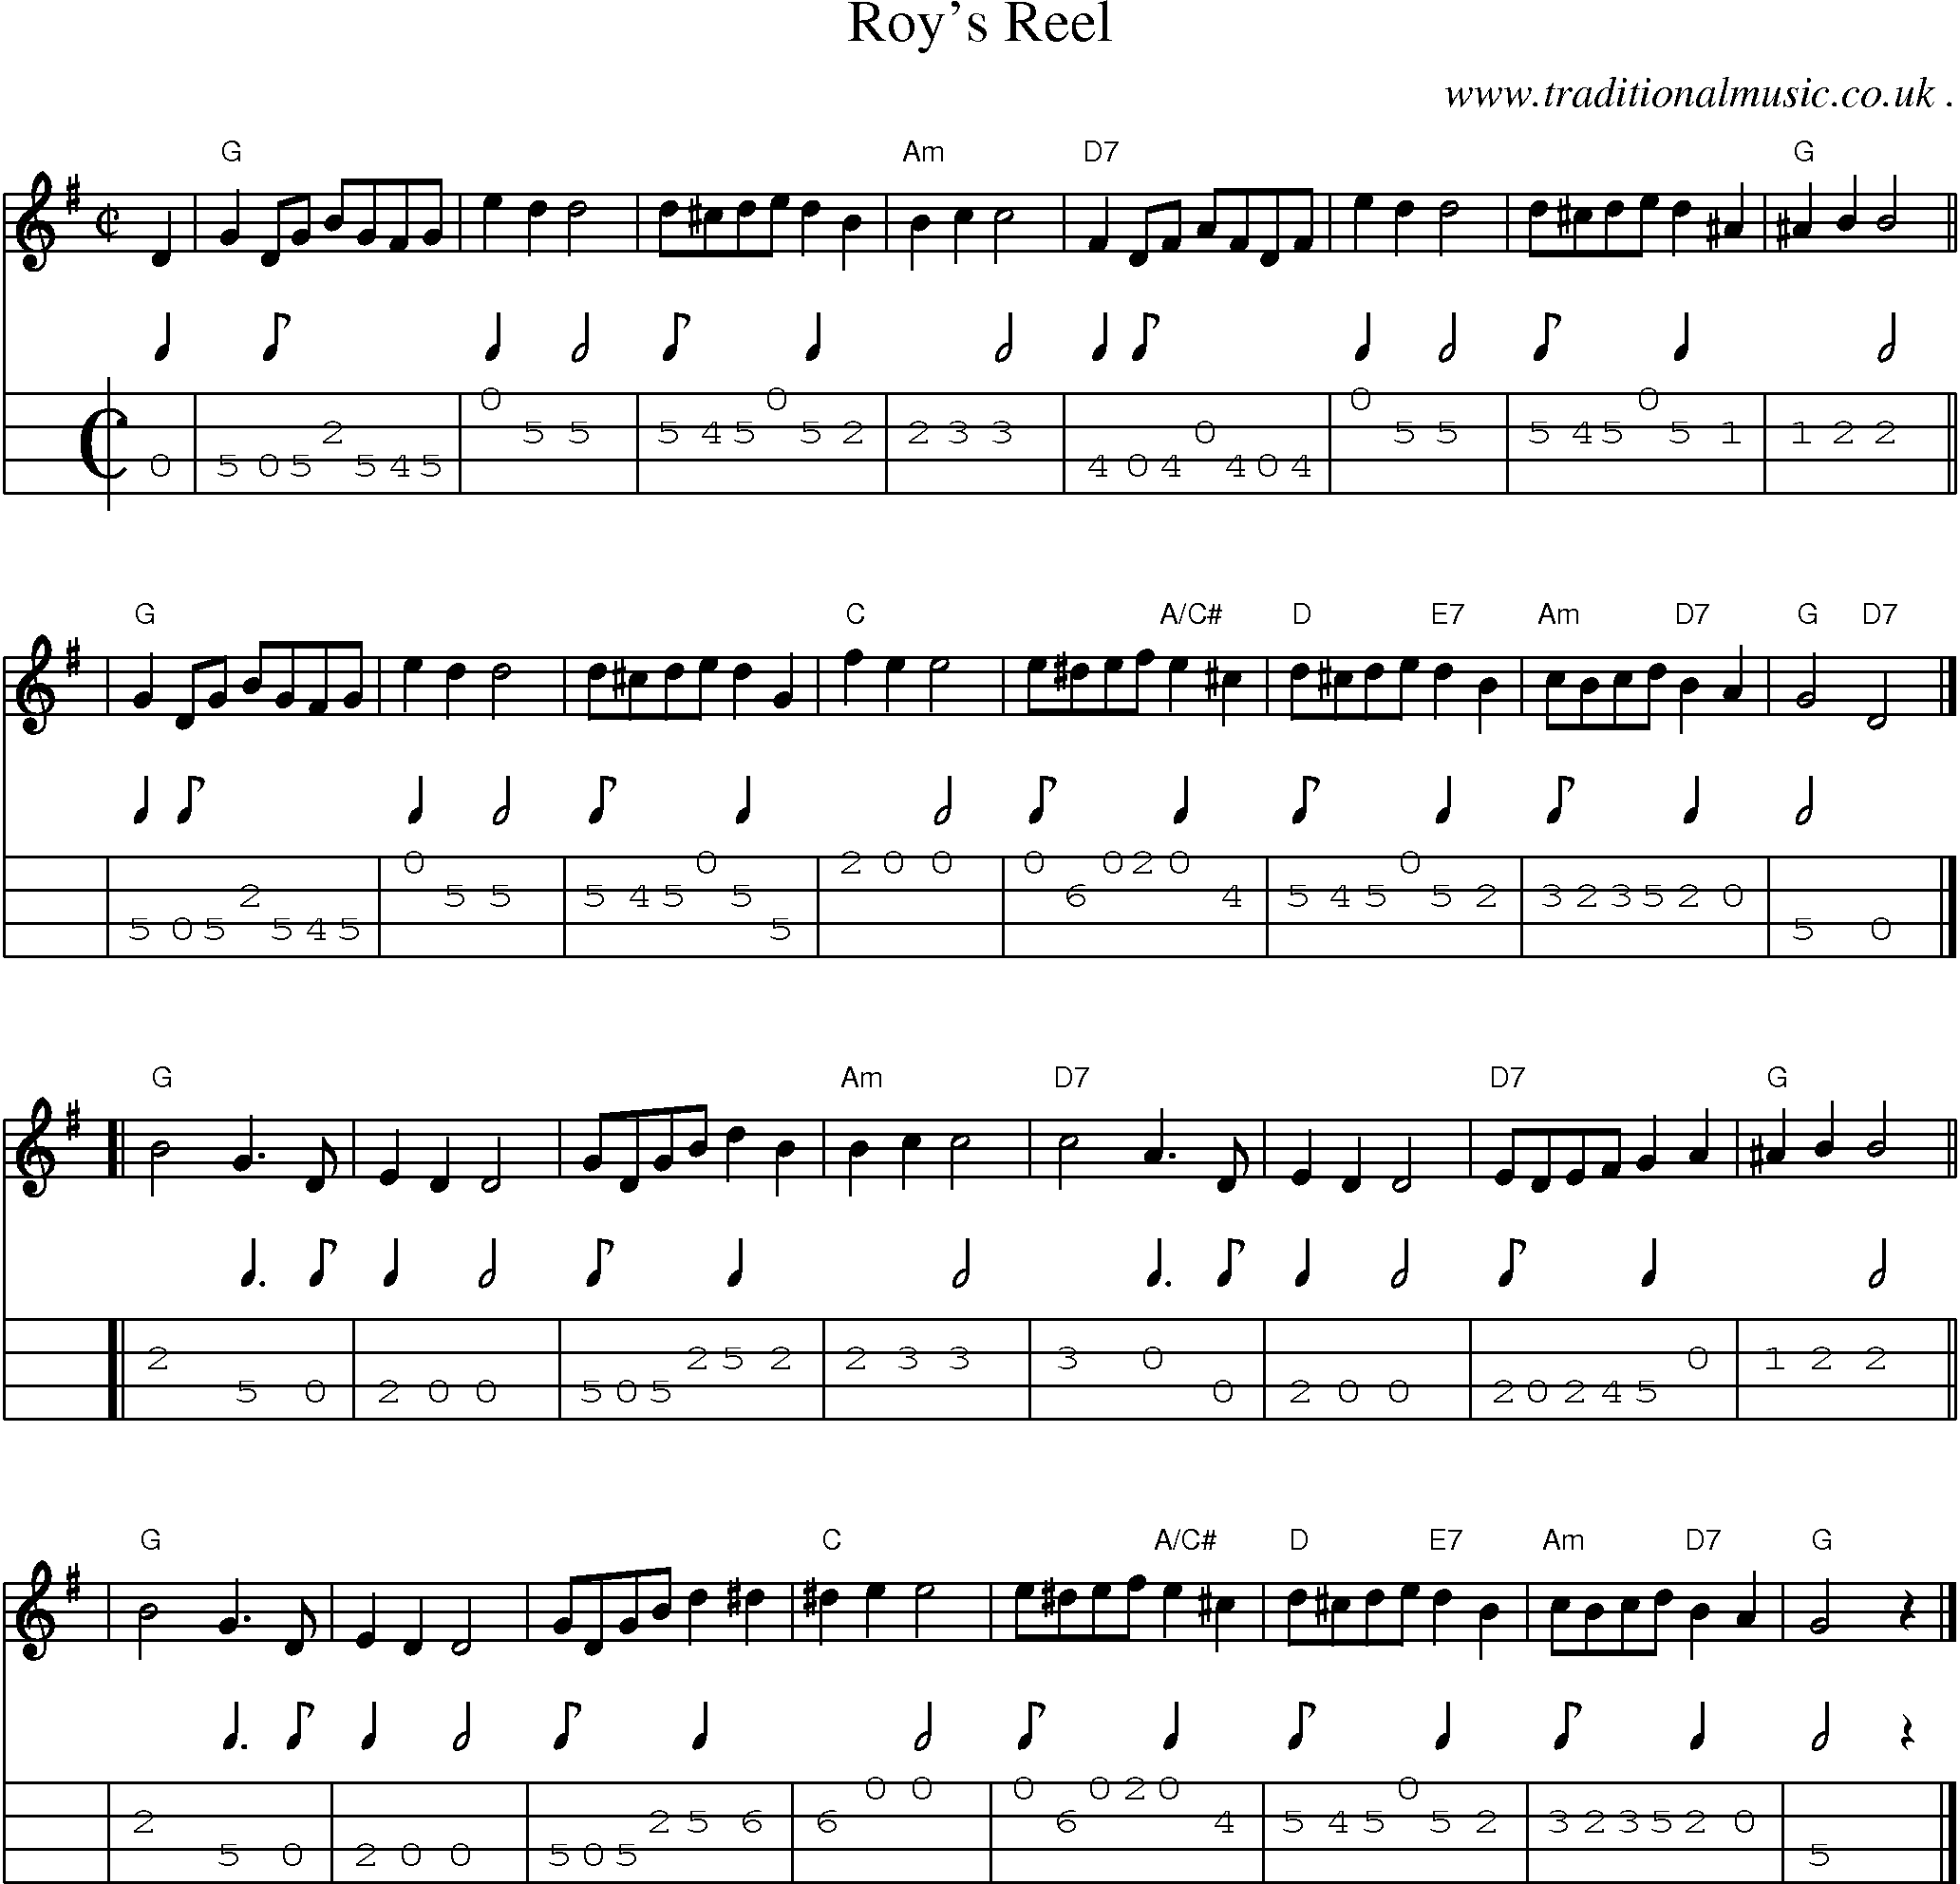 Sheet-music  score, Chords and Mandolin Tabs for Roys Reel